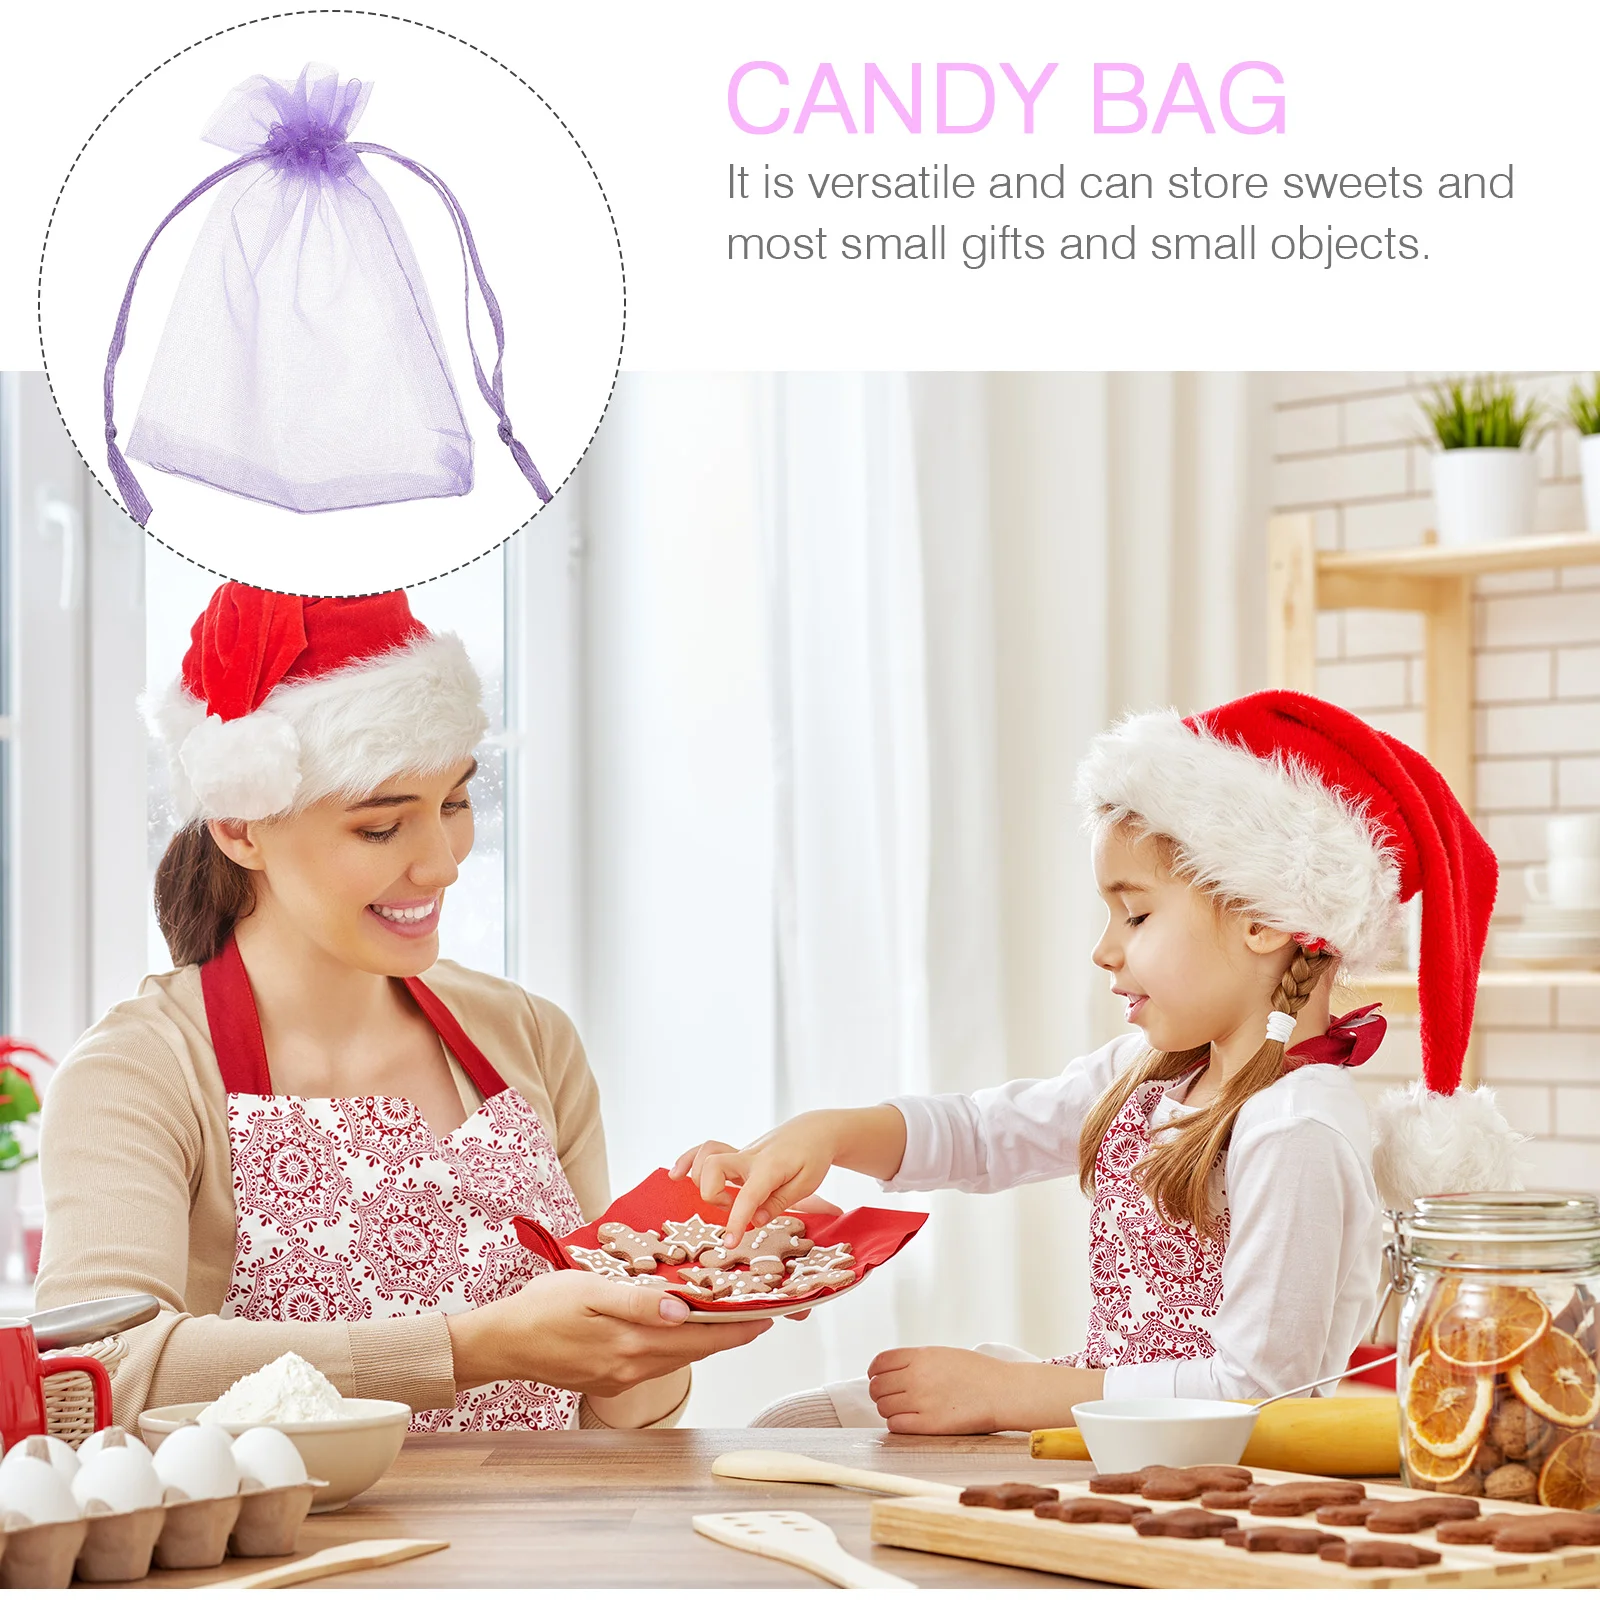 

50 Pcs Clear Candy Bags Packing Purple Organza Cookie Drawstring Wedding Favor Small Pouches Gift